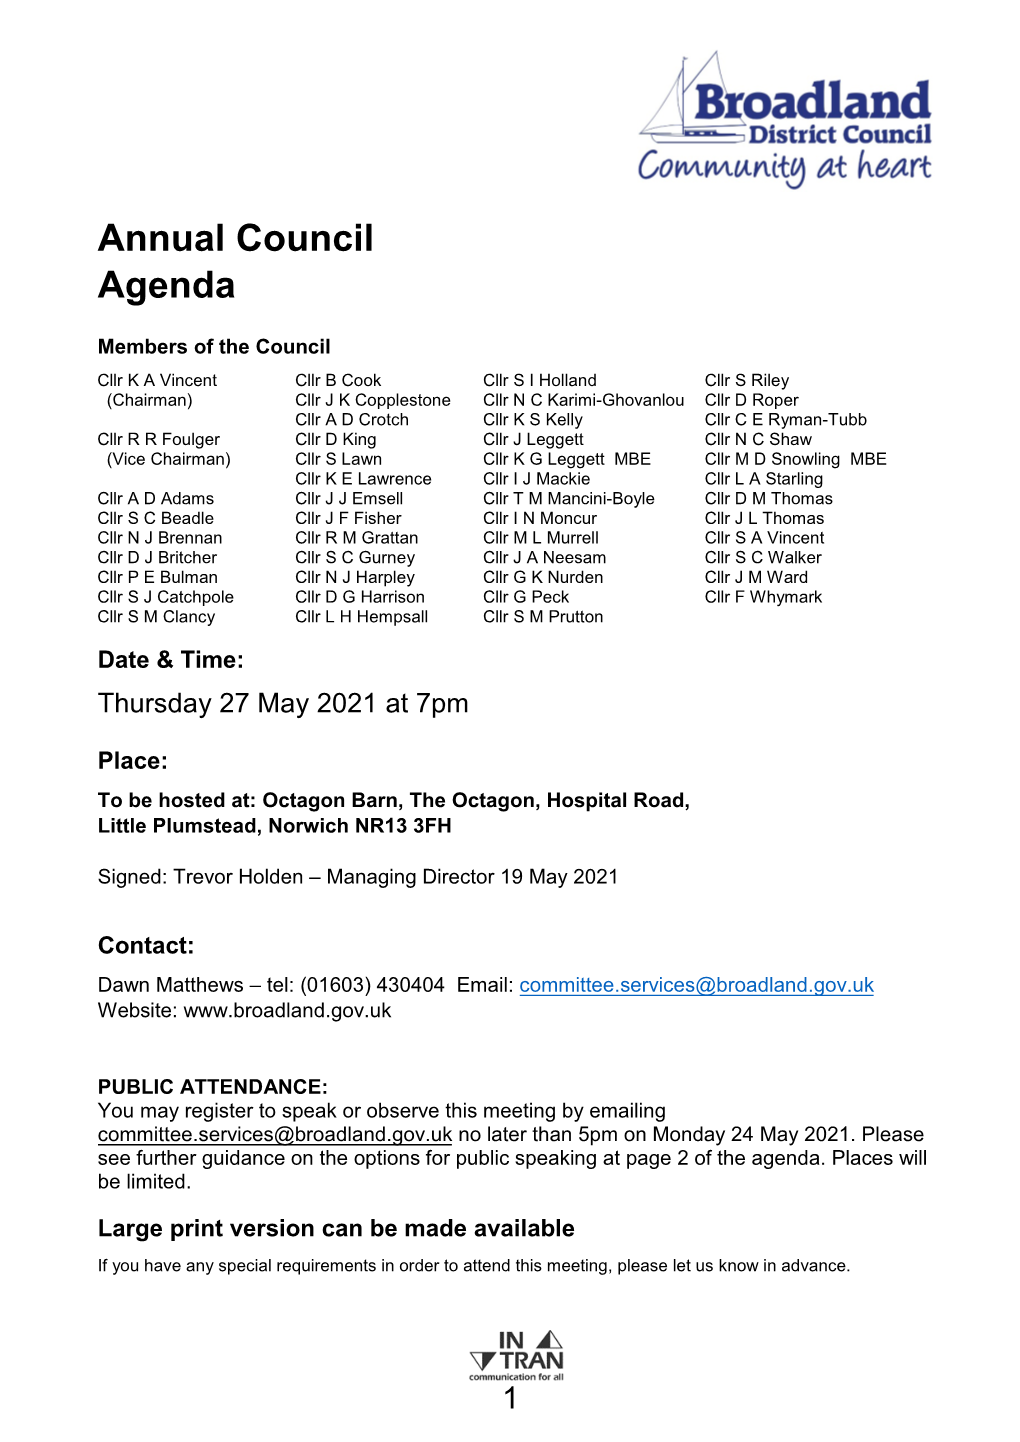 Council Annnual Meeting 27 May 2021